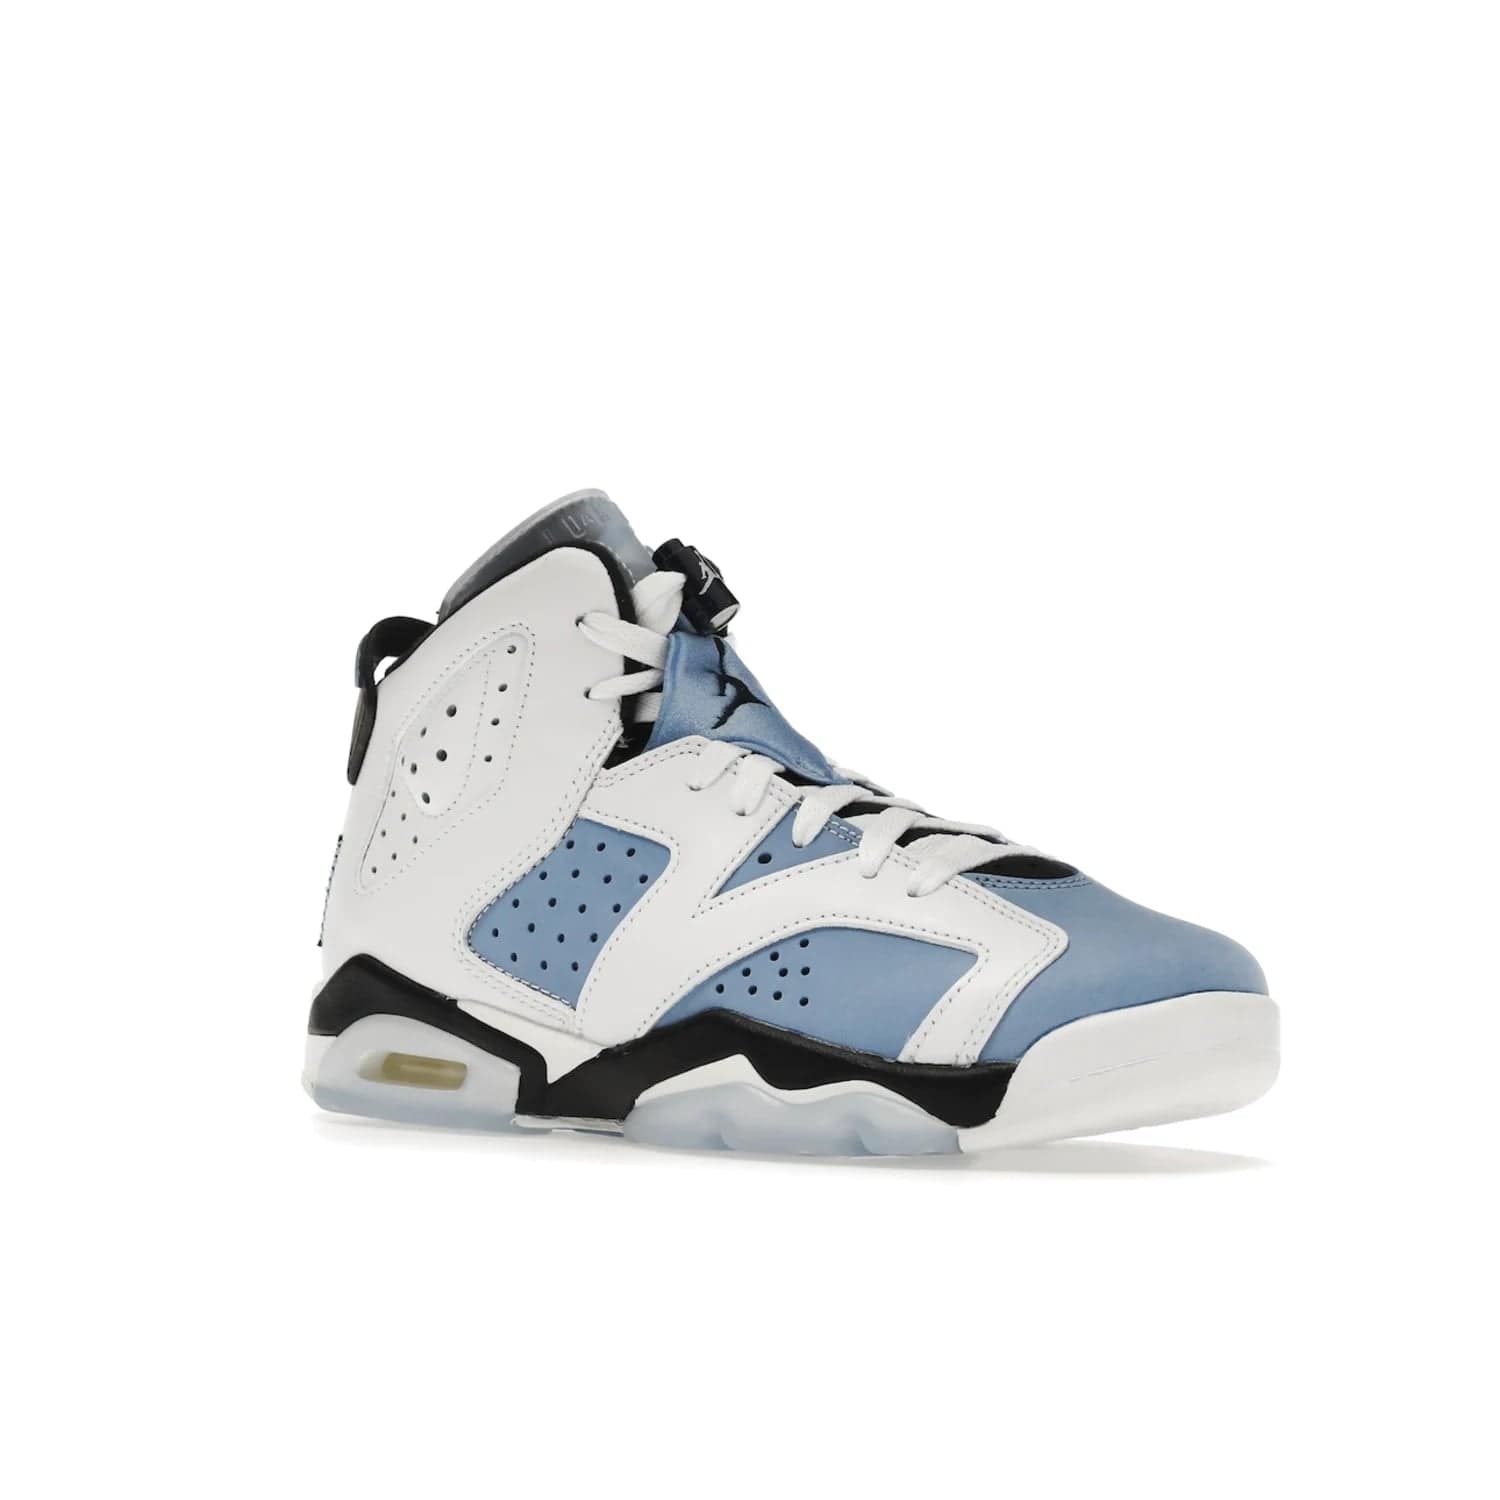 Jordan 6 Retro UNC White (GS) - Image 5 - Only at www.BallersClubKickz.com - Air Jordan 6 Retro UNC White GS: Michael Jordan alma mater, UNC Tar Heels, featuring colorway, nubuck, leather, Jumpman branding and a visible Air unit. Translucent blue/white outsole, perfect for completing sneaker rotation.